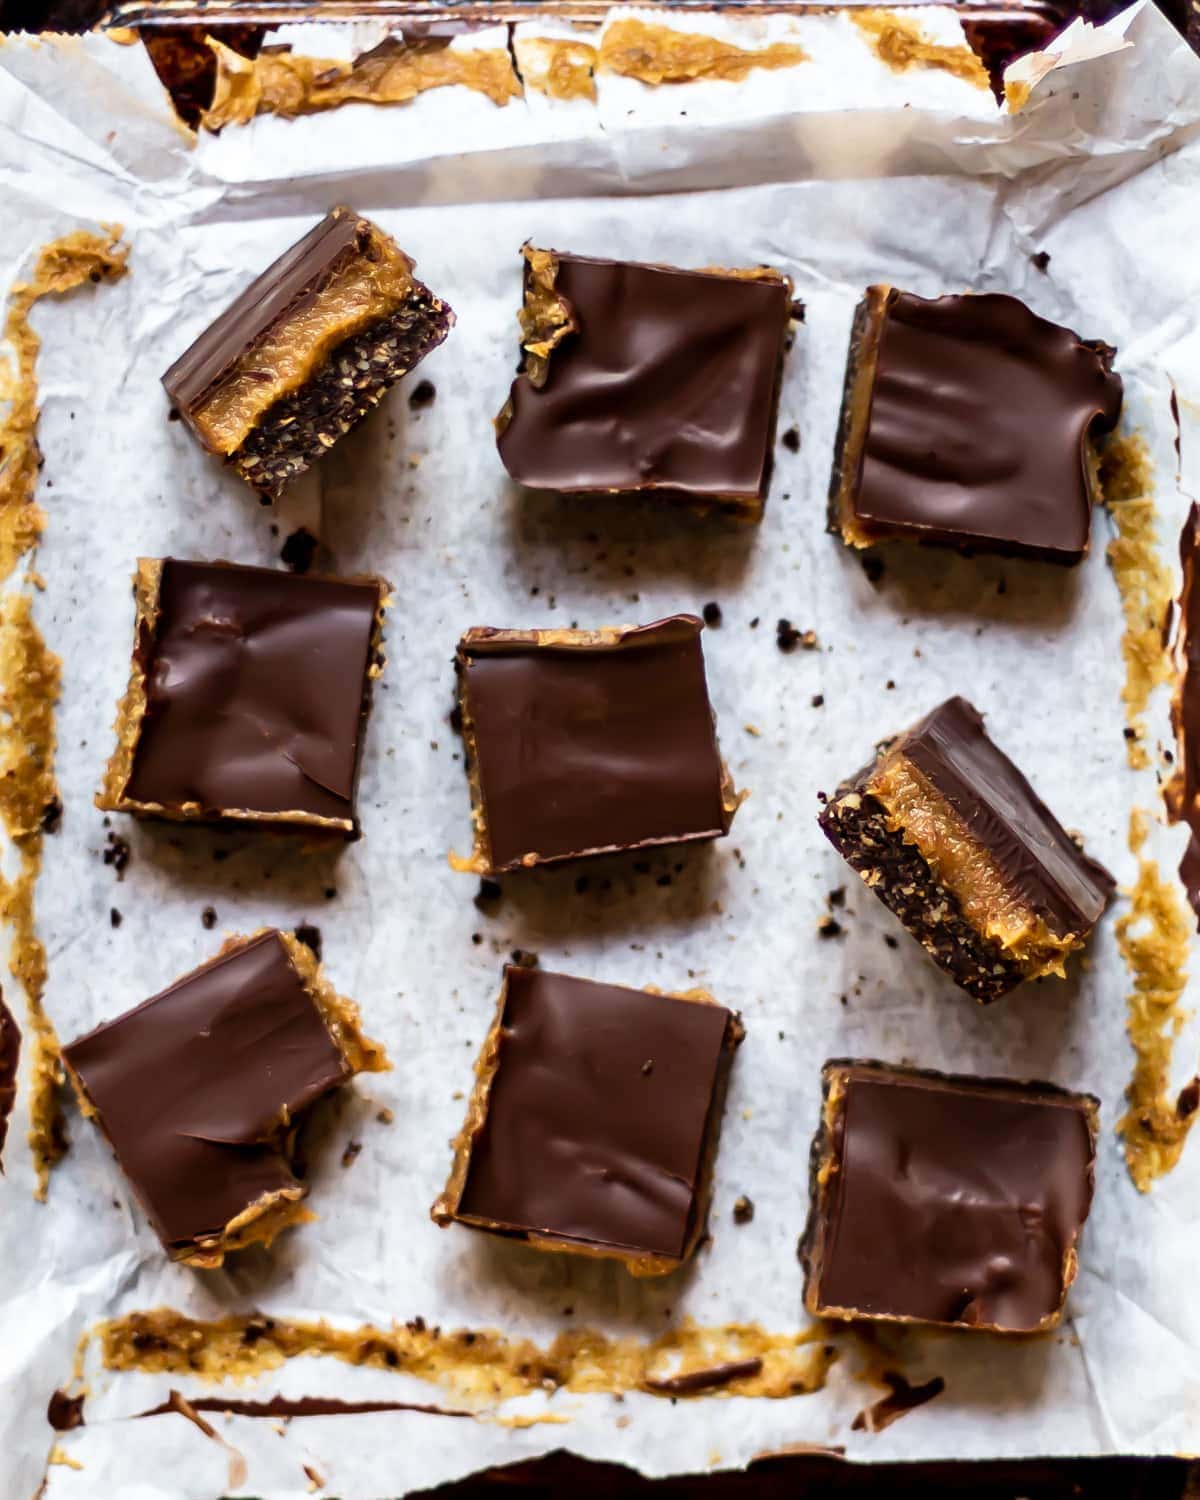 9 vegan caramel slices cut in to squares, on a white sheet of greaseproof paper. Two slices have been turned on their side to show the layers within - the base, caramel filling, and chocolate topping.